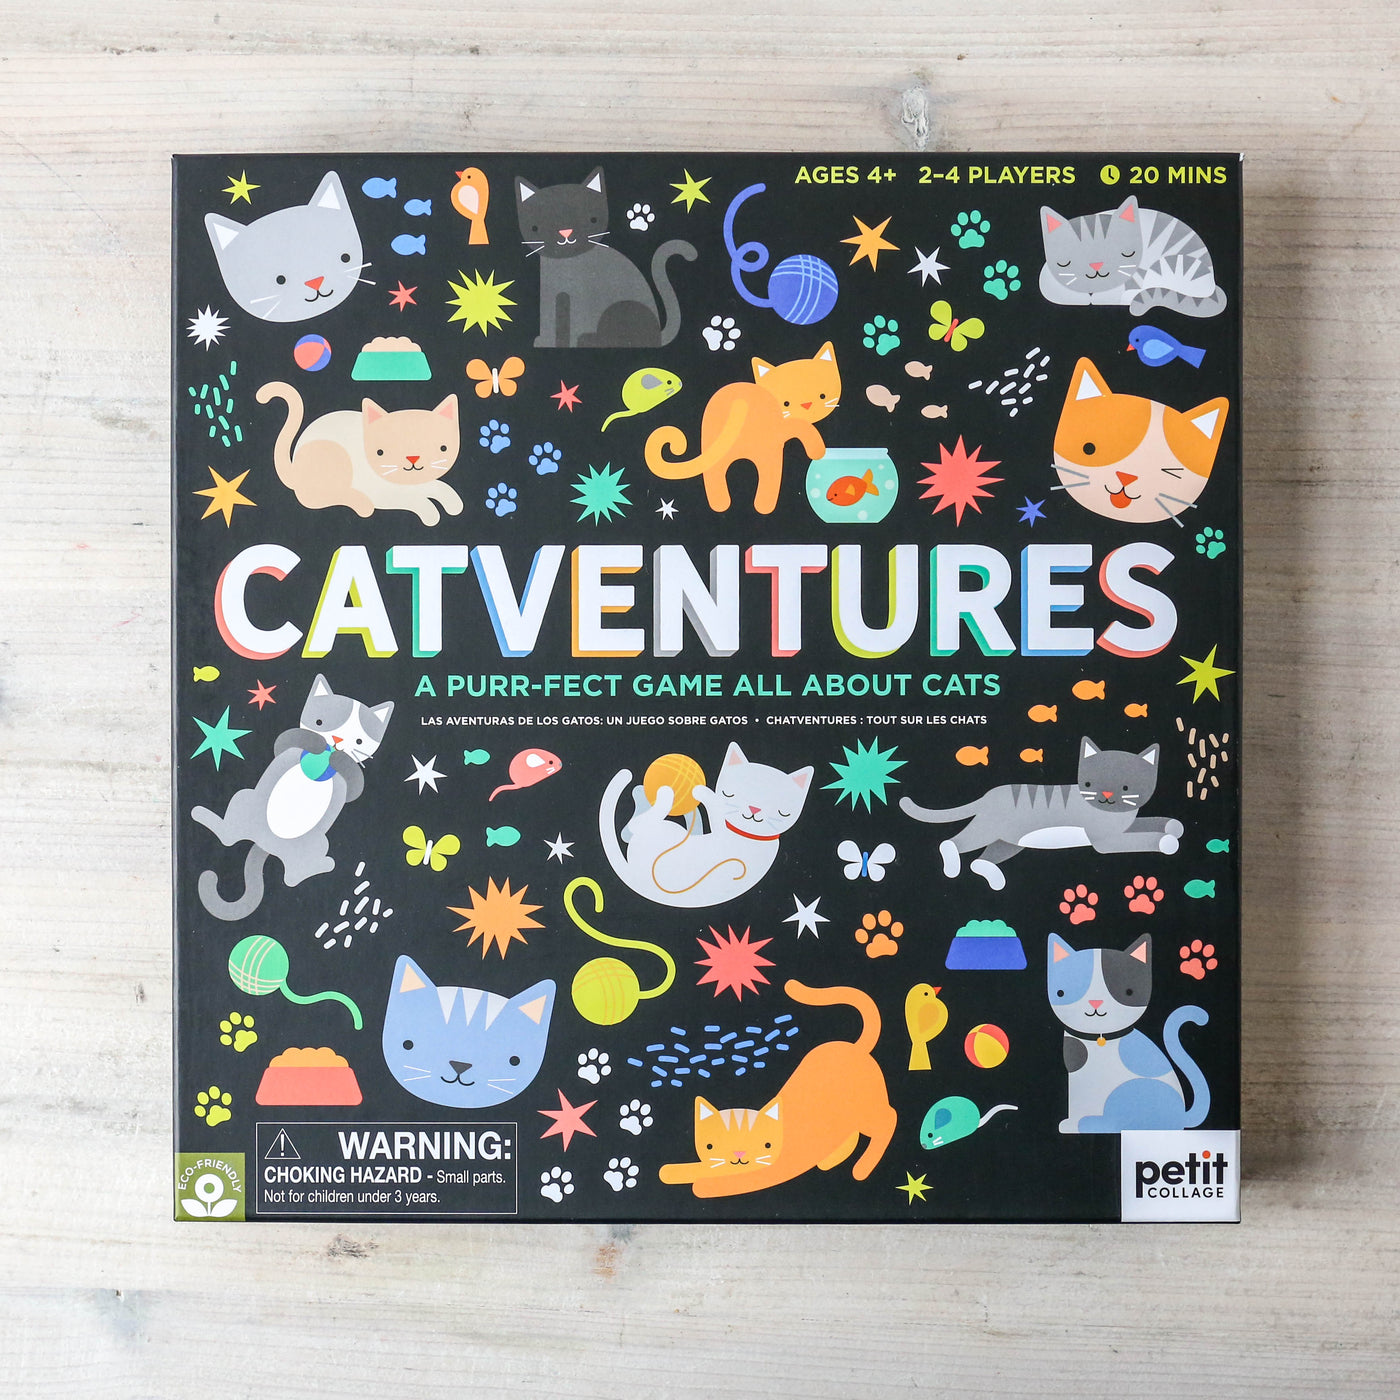 Catventures - A Purrfect Game